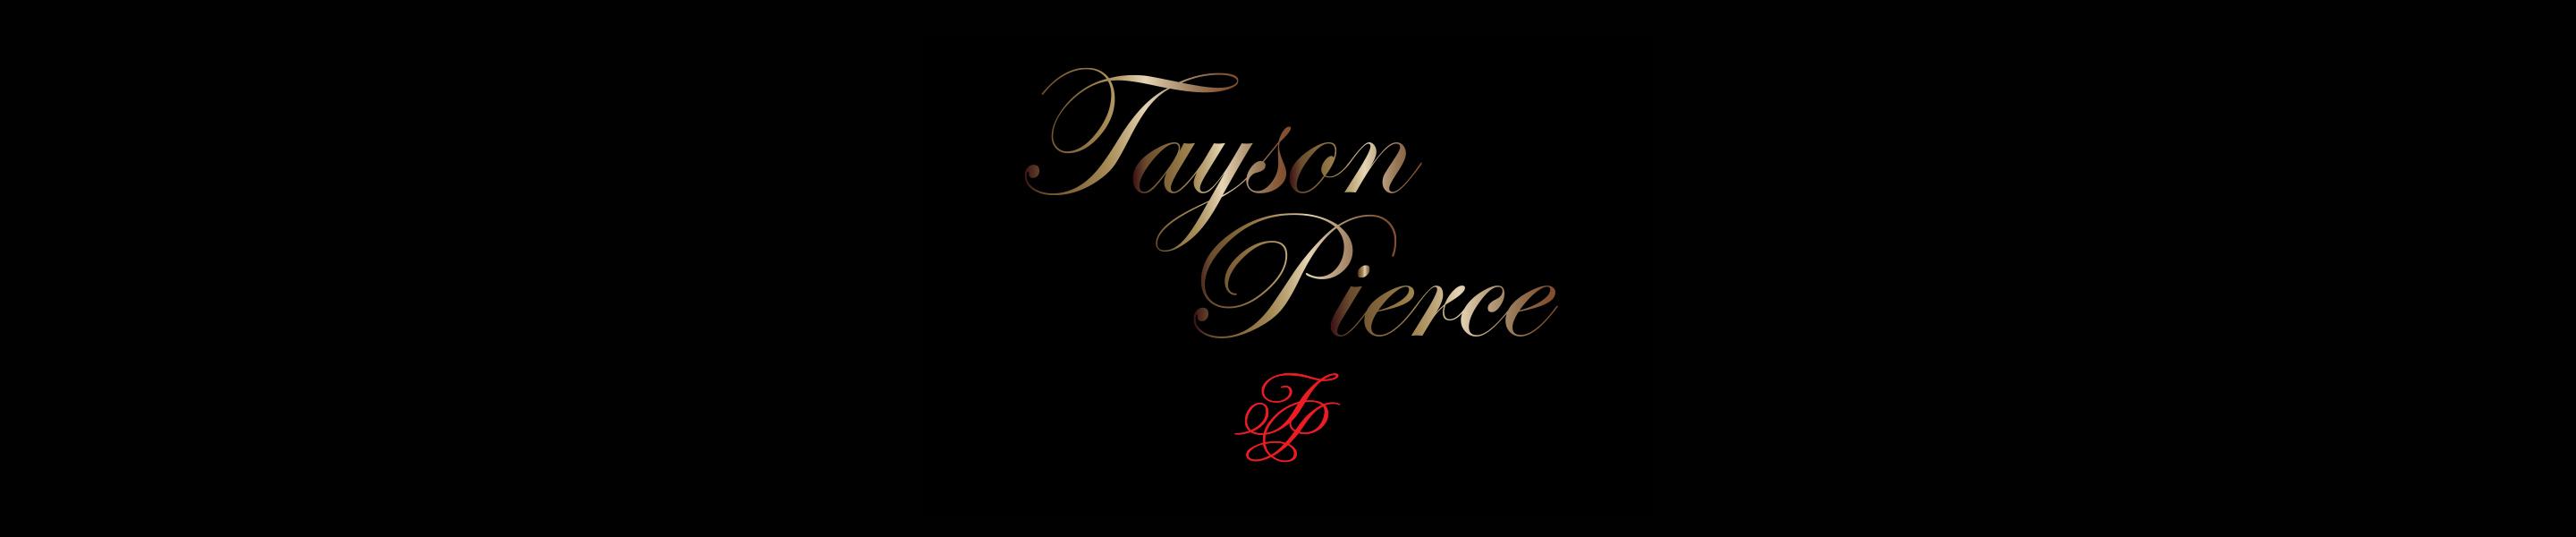 Founded by the Rothchild family in 2005 in Rutherford, California, Tayson Pierce Estate Wines produces Award Winning Single Vineyard wines in reserved quantities. Their wines are only available directly from the winery, fine dining establishments around the country and exclusive wine merchants.  The name Tayson Pierce comes from the three sons Taylor, Grayson and Pierce. 